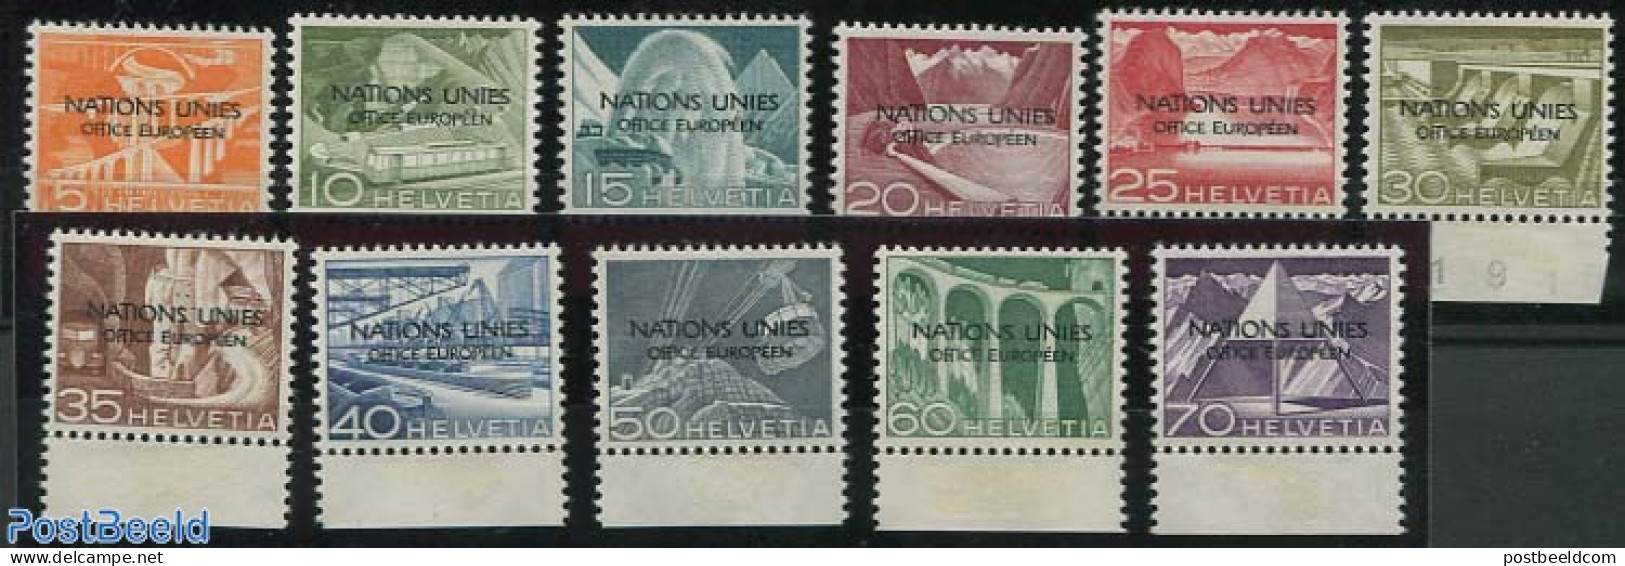 Switzerland 1950 UNO Office 11v, Overprint Variety: OF[ICE, Mint NH, Nature - Transport - Various - Water, Dams & Fall.. - Nuevos